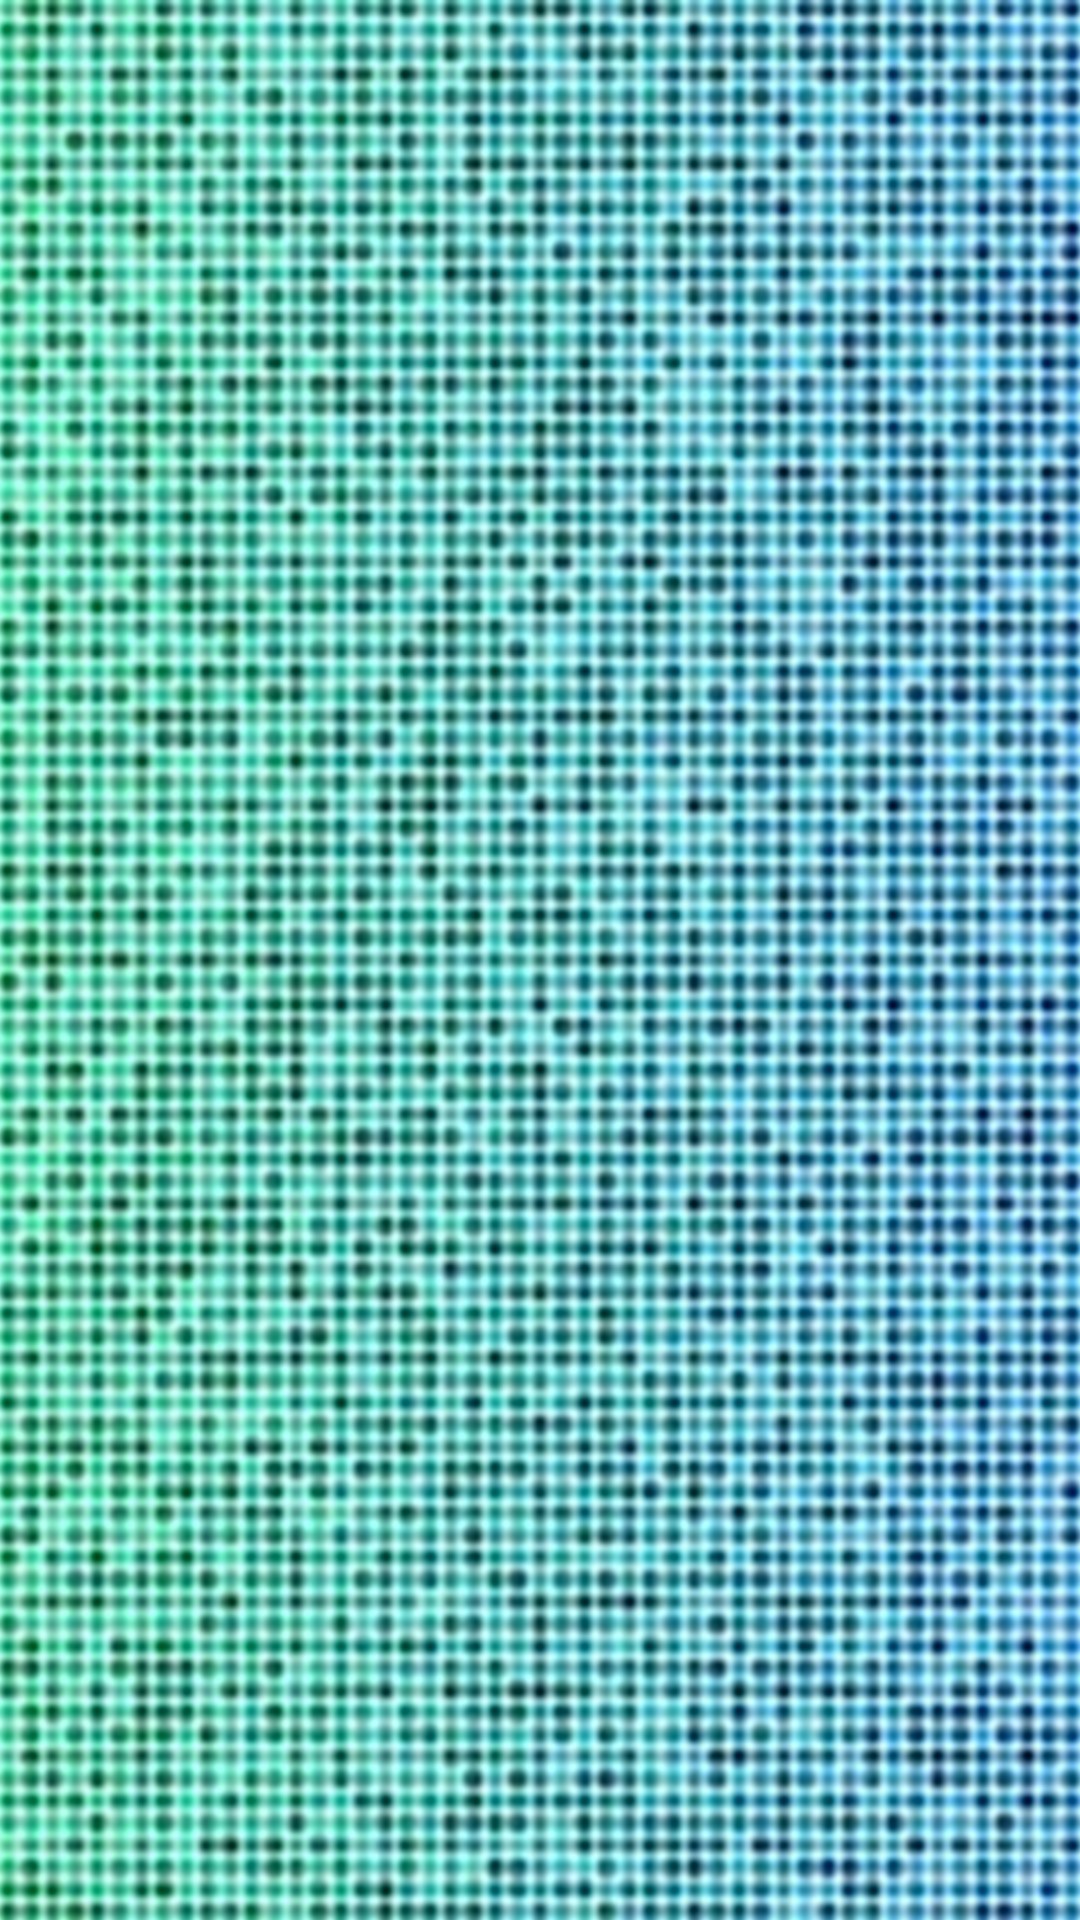 Teal Blue Backgrounds For Android with image resolution 1080x1920 pixel. You can make this wallpaper for your Android backgrounds, Tablet, Smartphones Screensavers and Mobile Phone Lock Screen